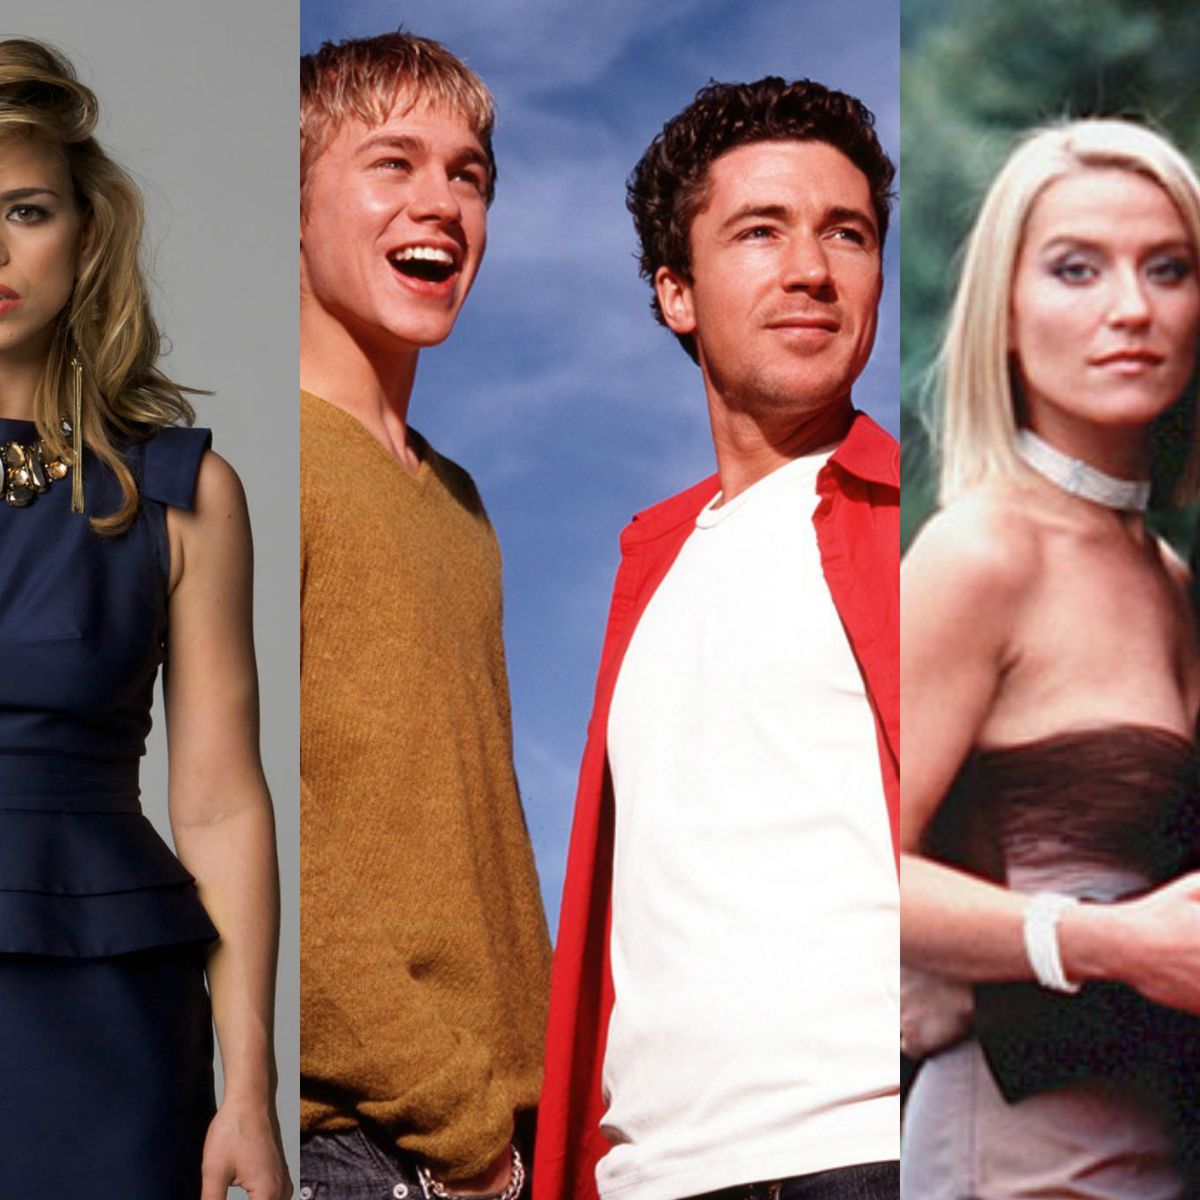 Girl Boy Sexse 3gp - The sexiest British TV shows